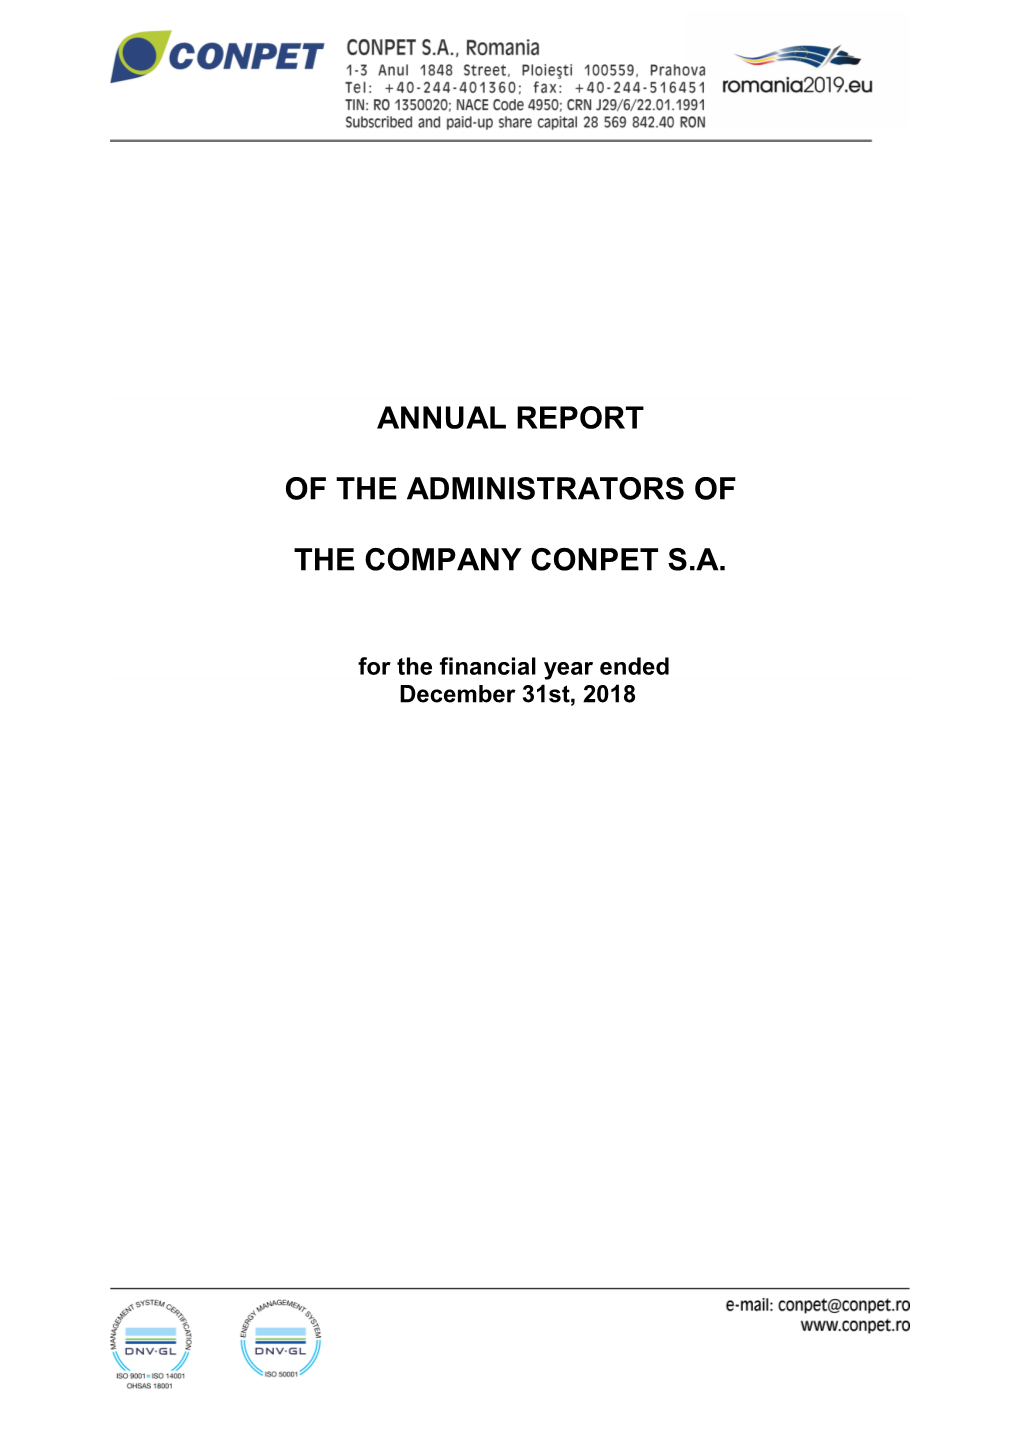 Annual Report of the Administrators 2018